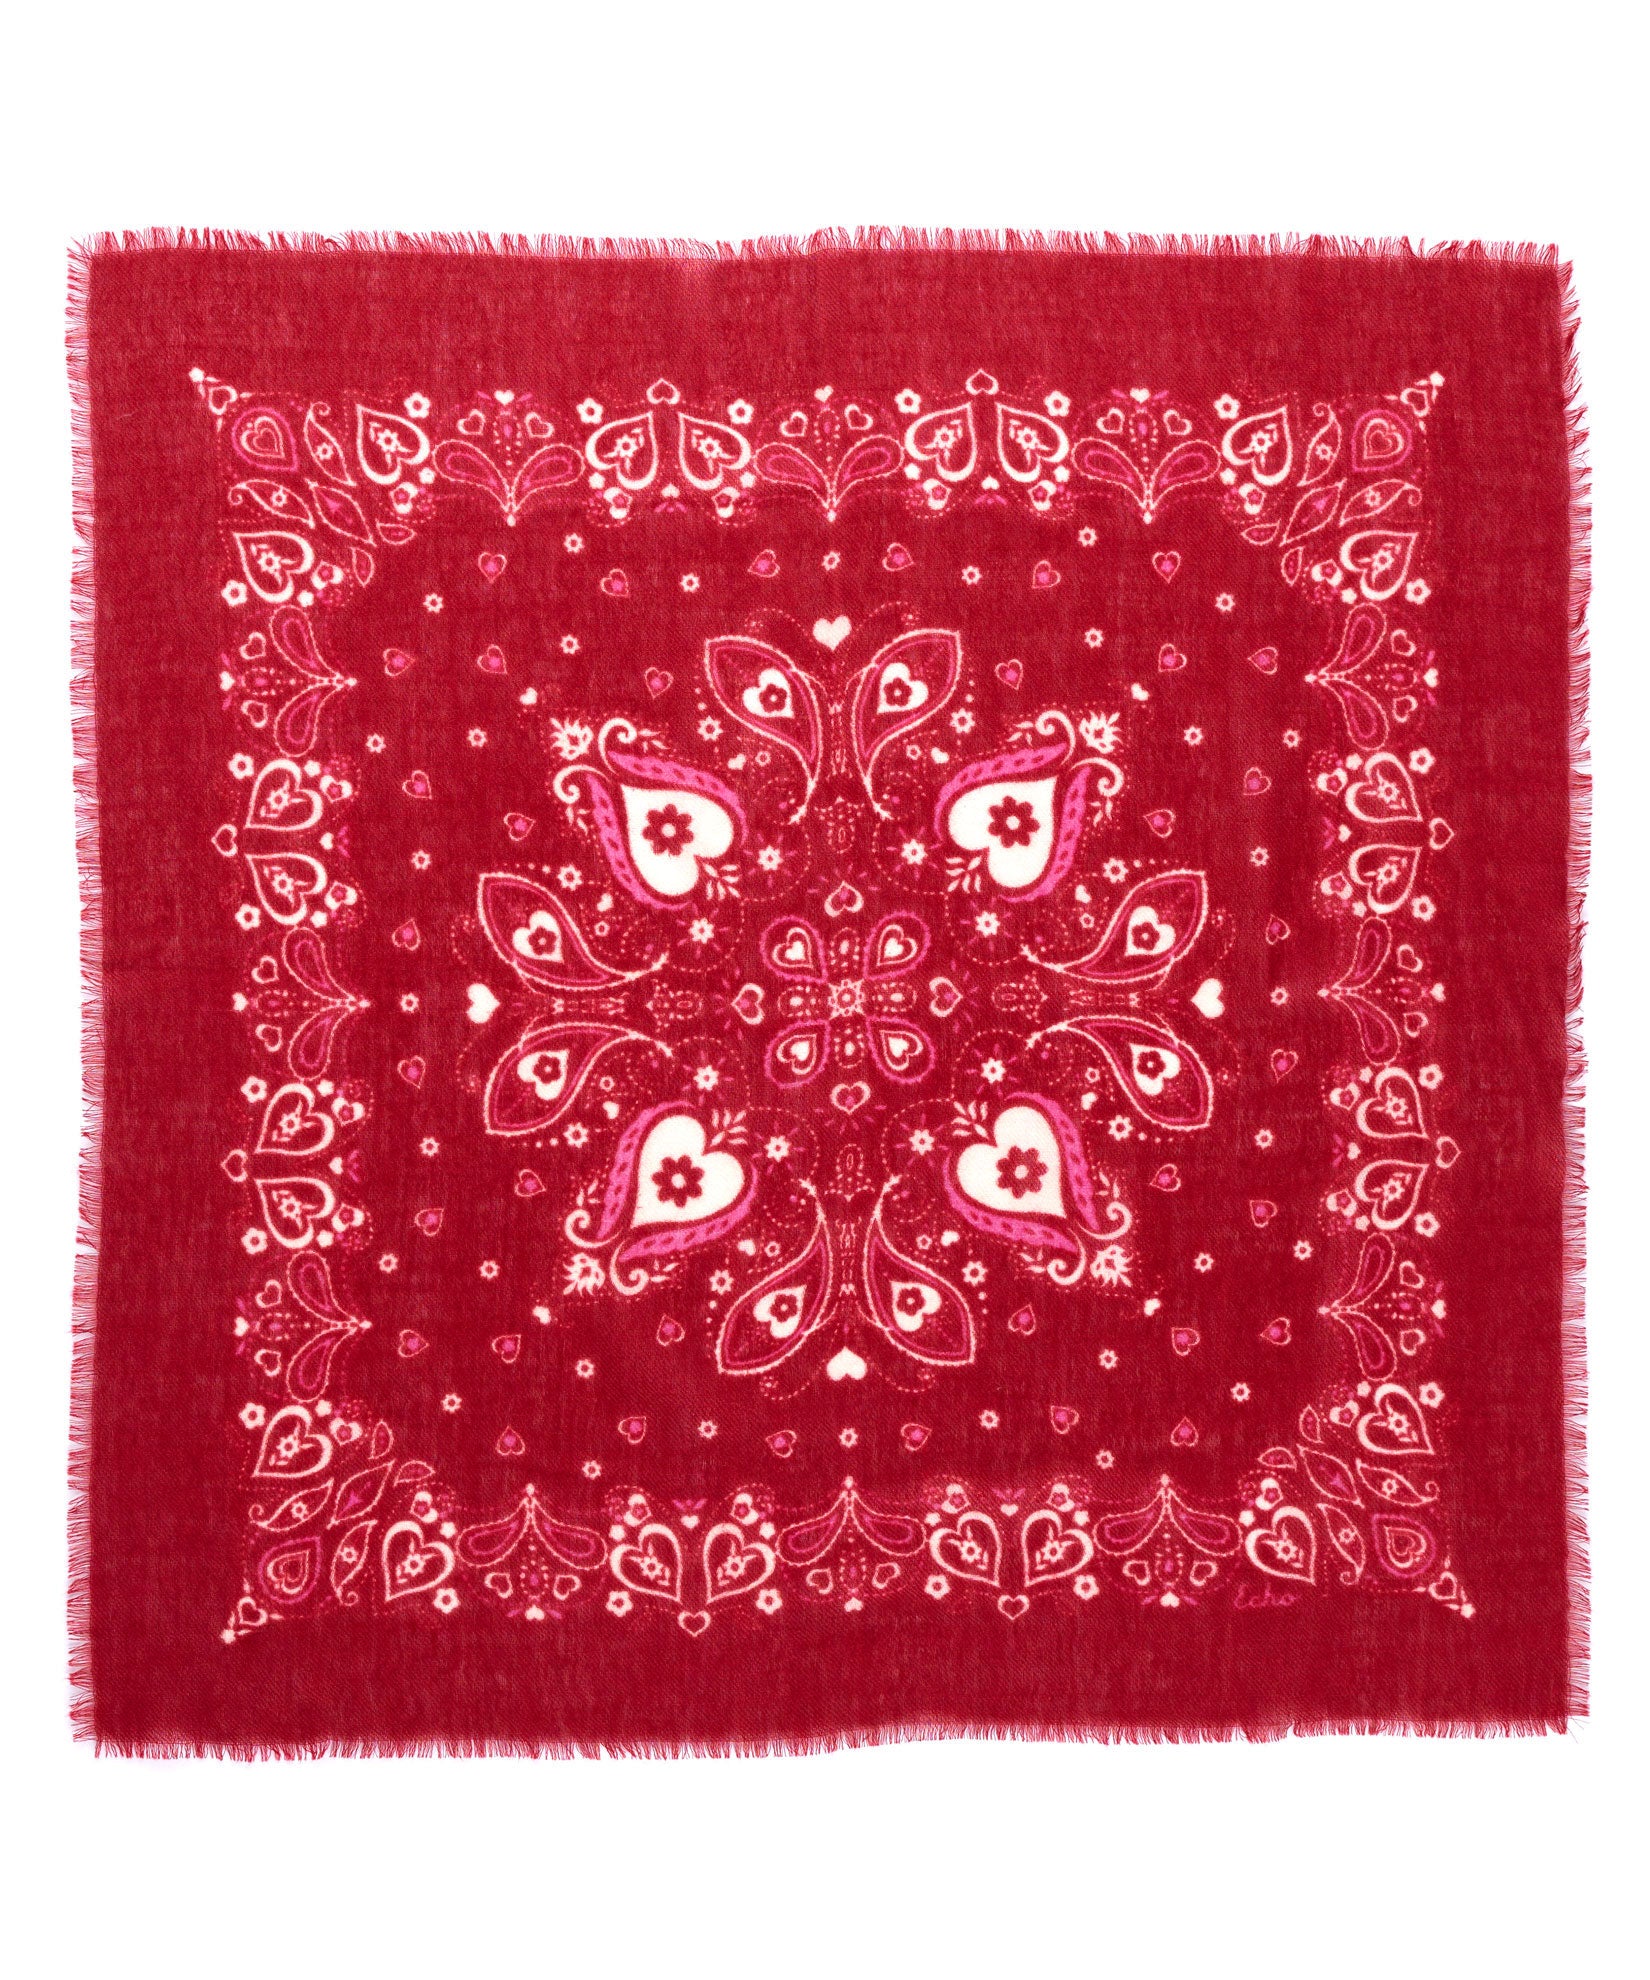 Heart Bandana in color Ruby Red